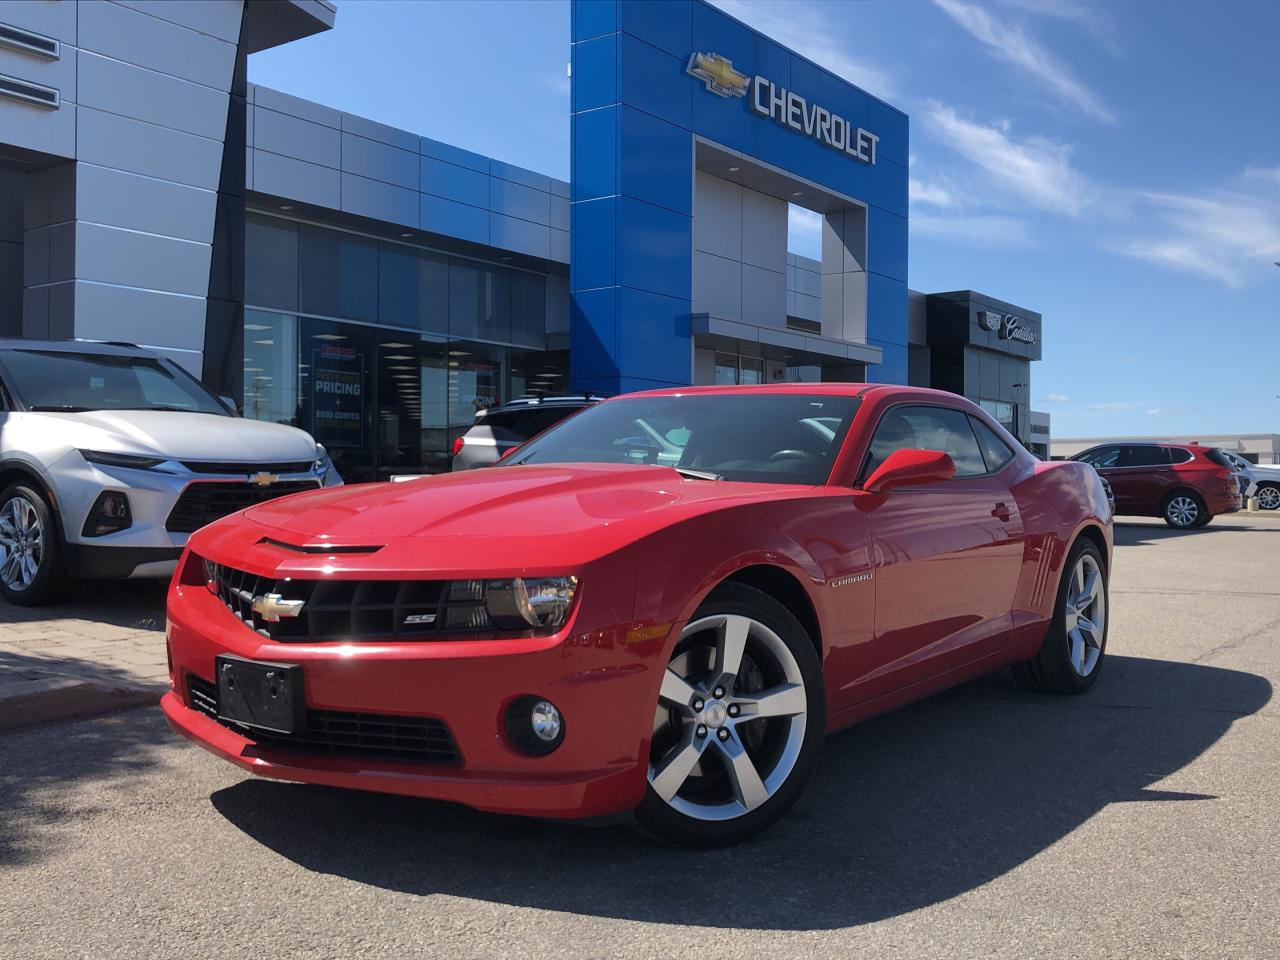 Used 2010 Chevrolet Camaro 1SS for Sale in Barrie, Ontario